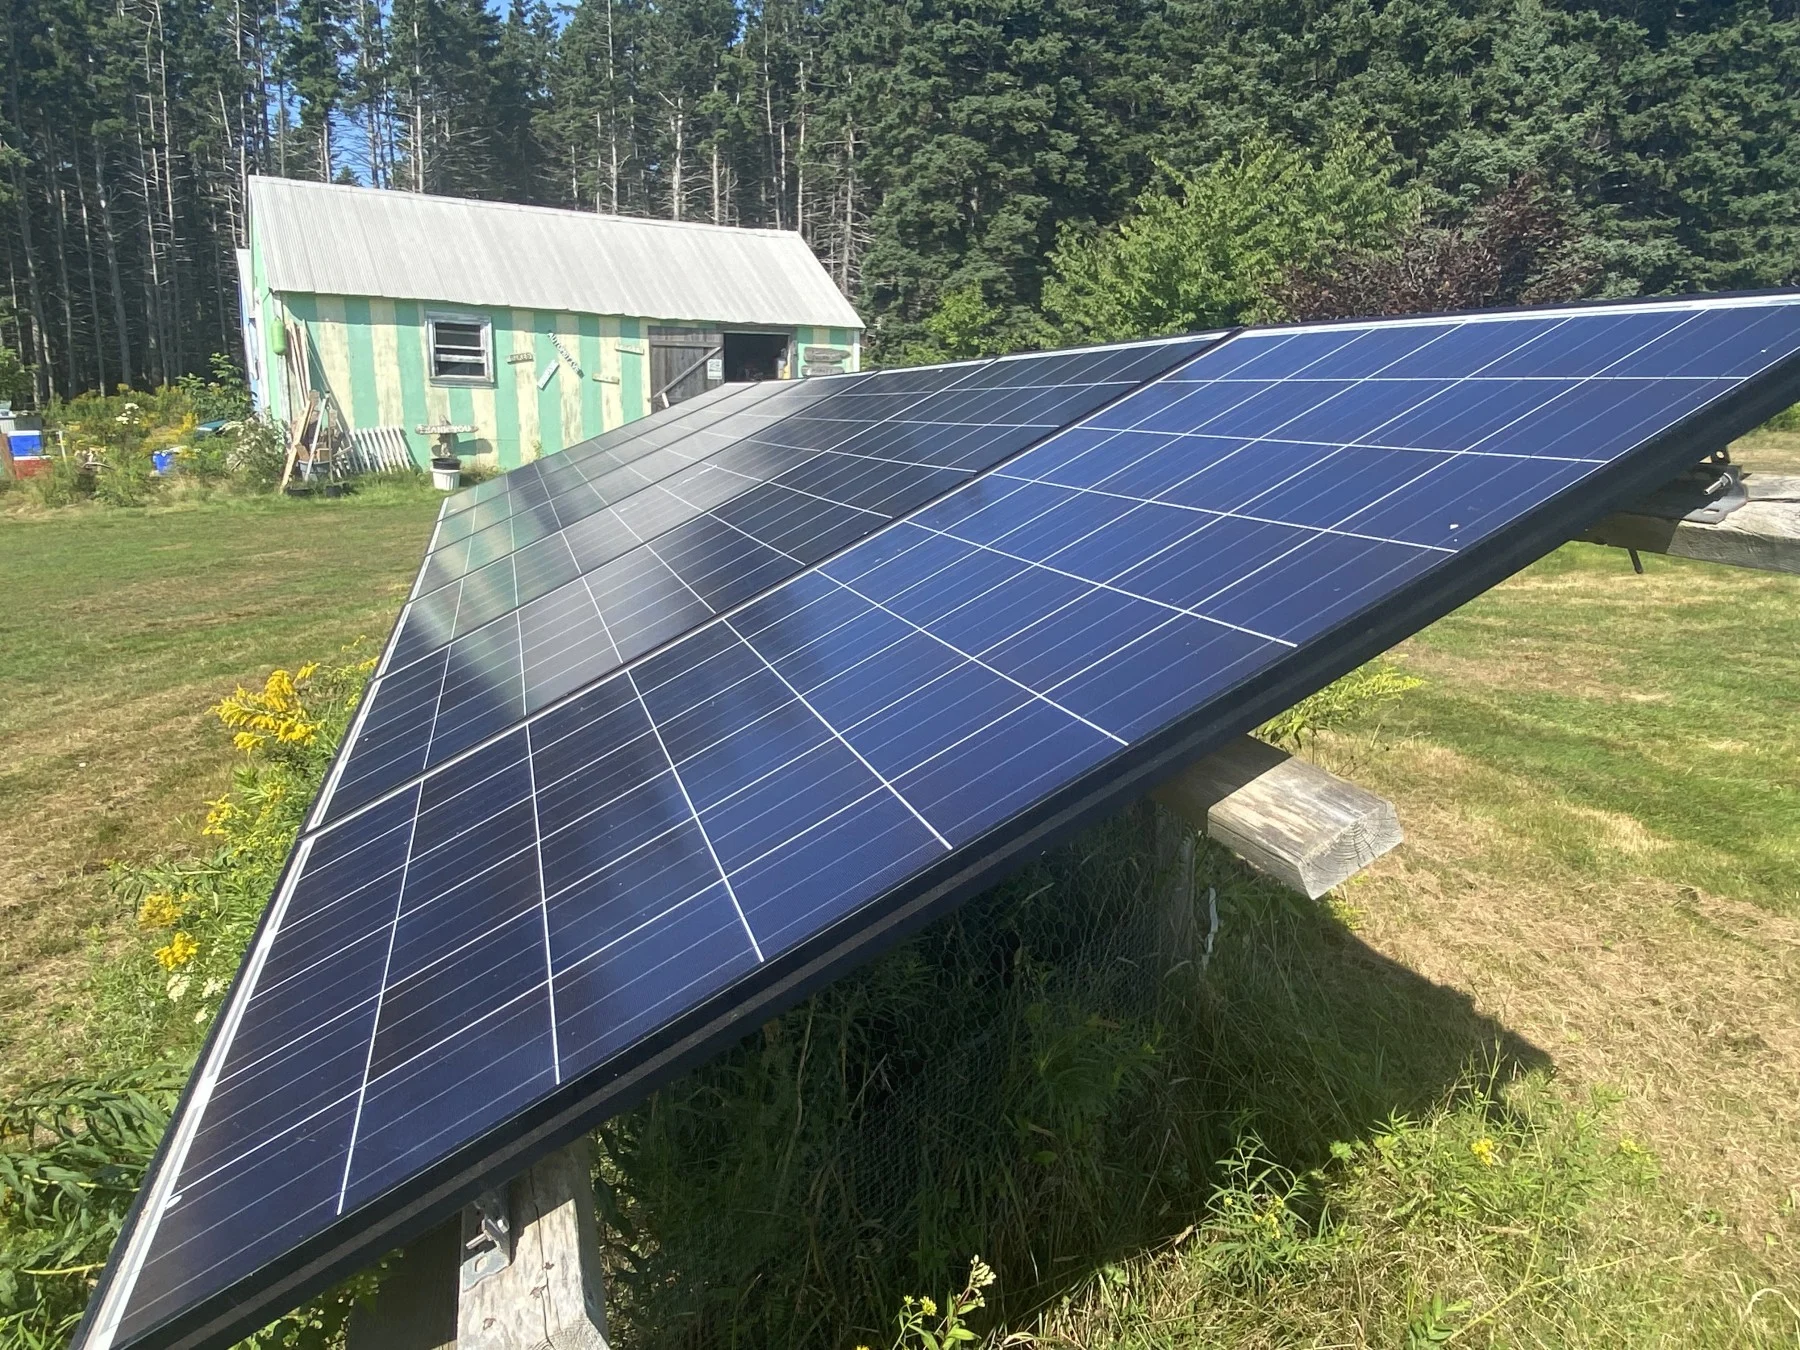 These solar panels generate energy for Pictou Island’s only store. (Nathan Coleman)